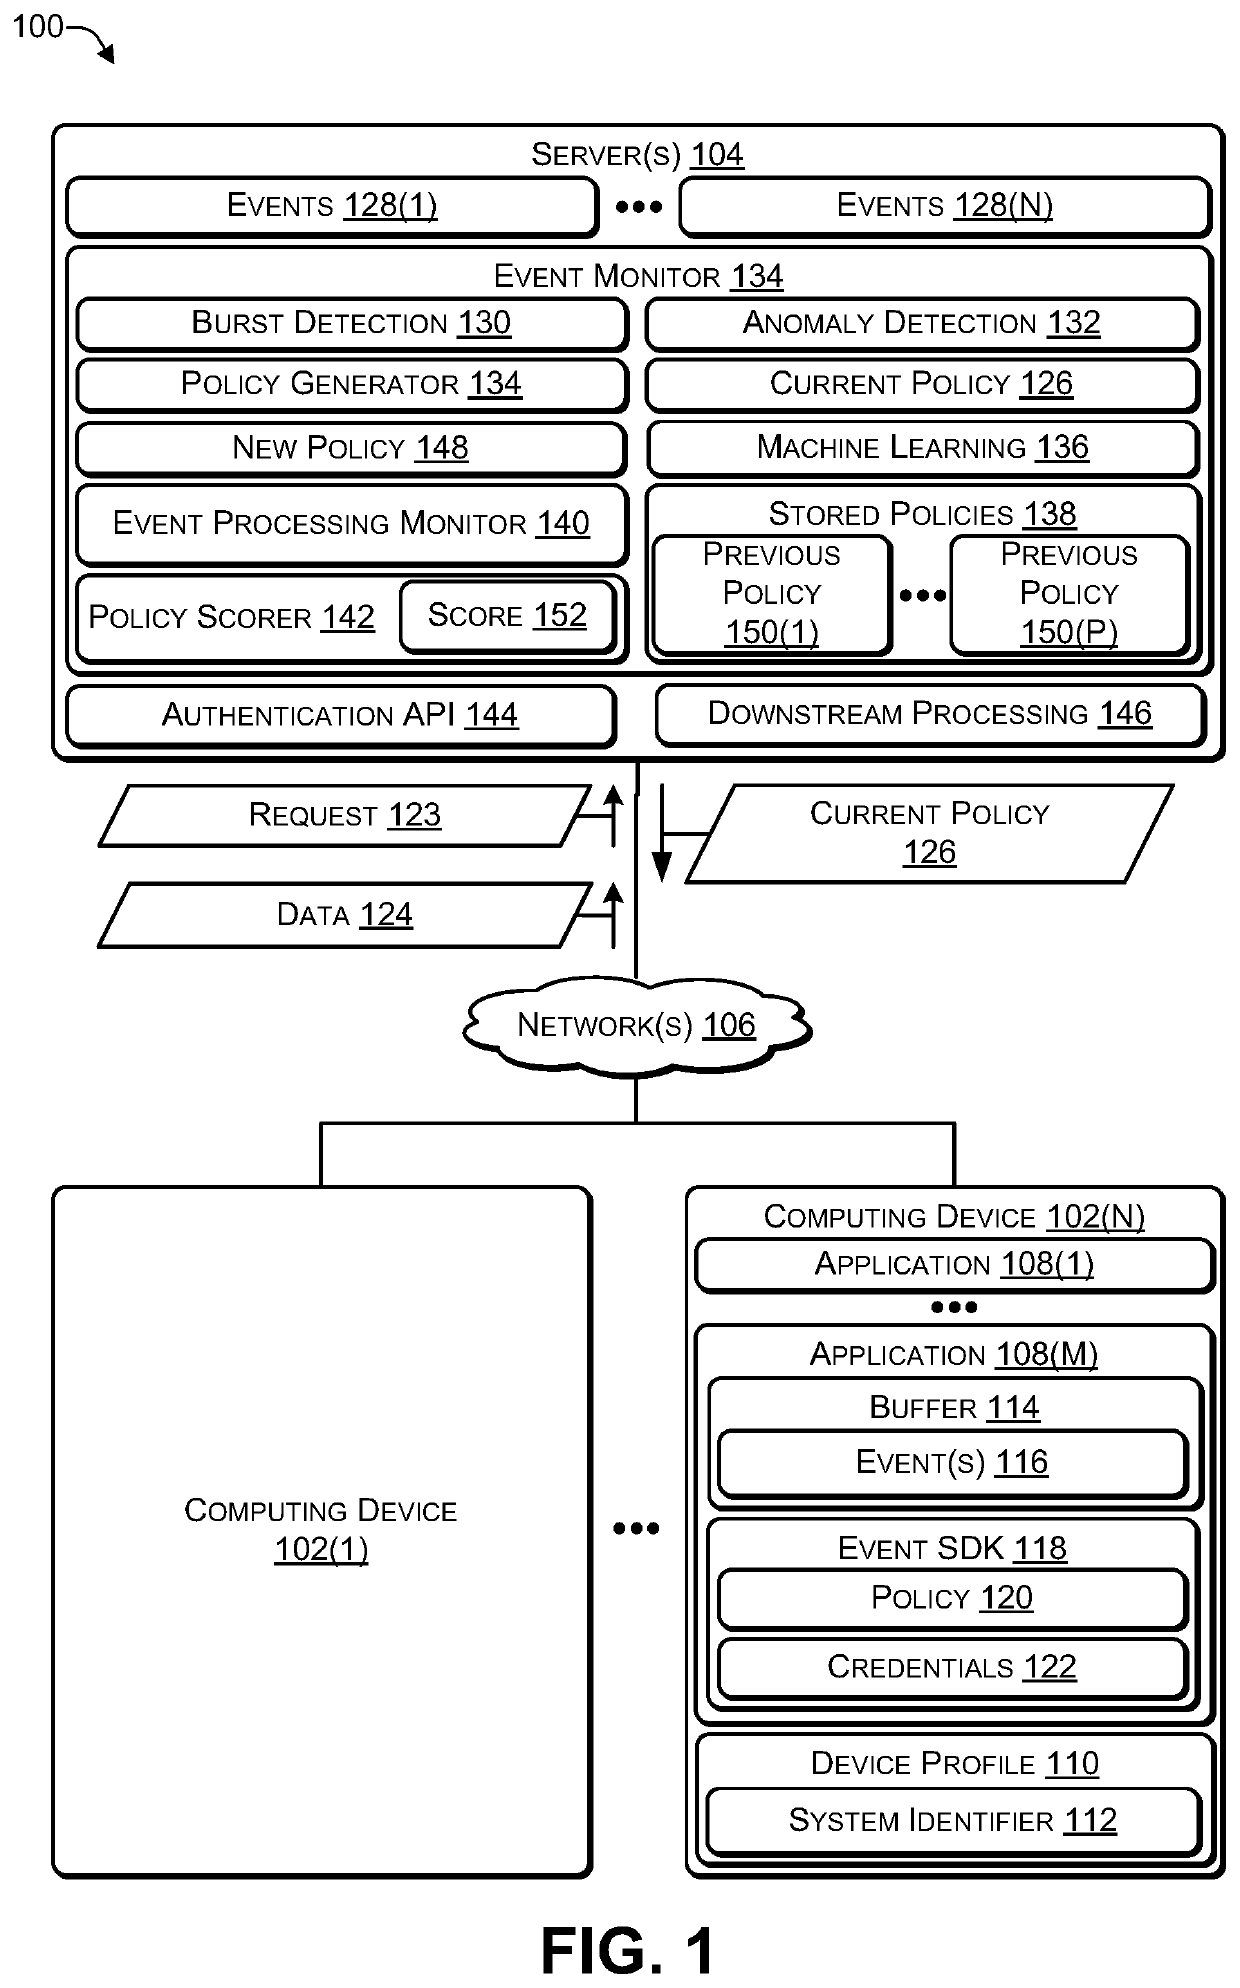 Dynamically selecting or creating a policy to throttle a portion of telemetry data